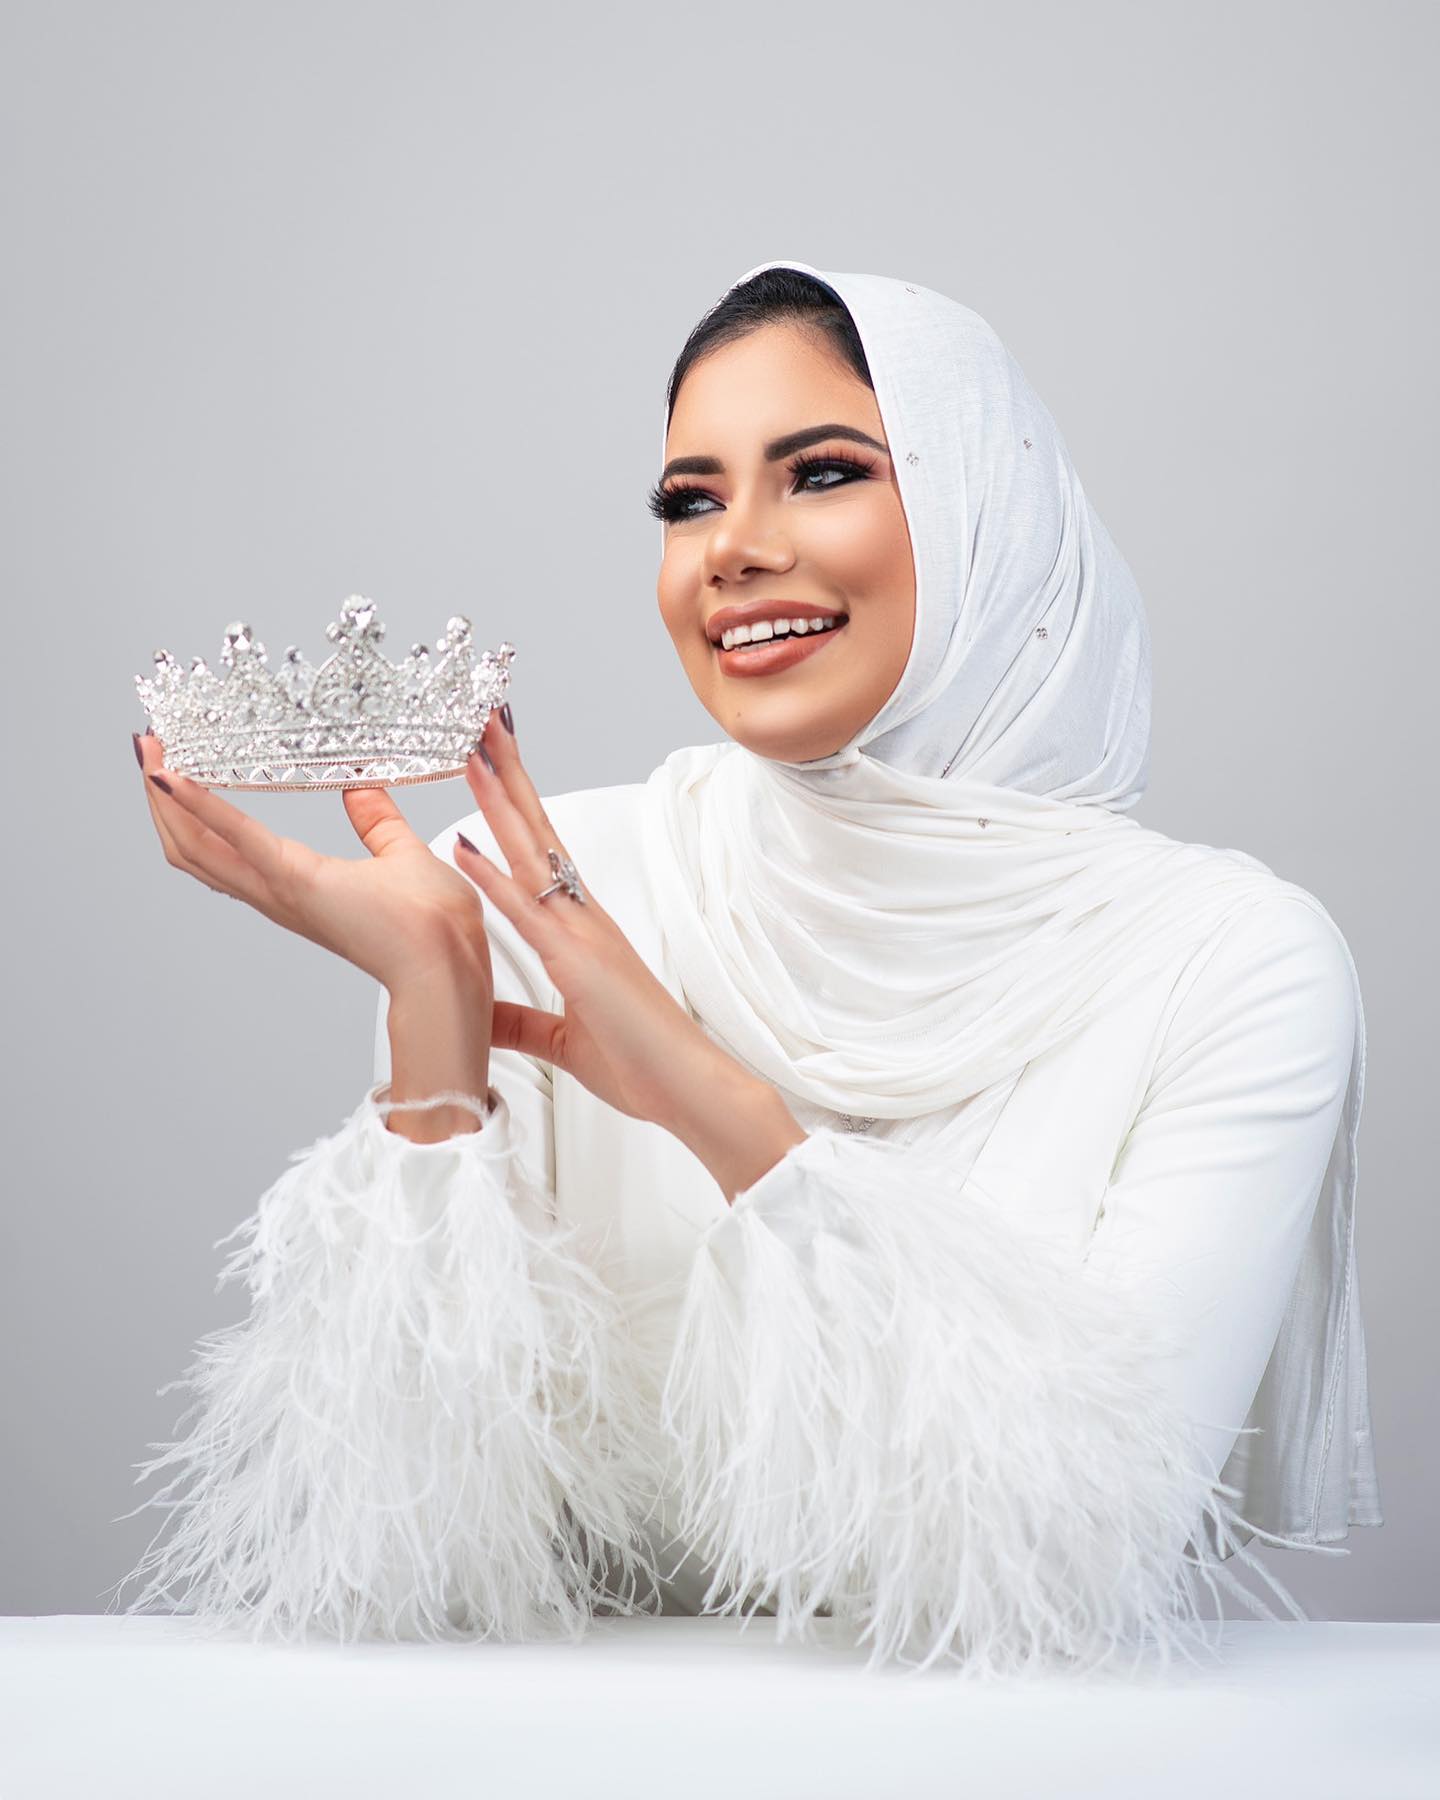 Egyptian-American Forbes Under 30 recipient Dina Ayman is Running for Miss New Jersey